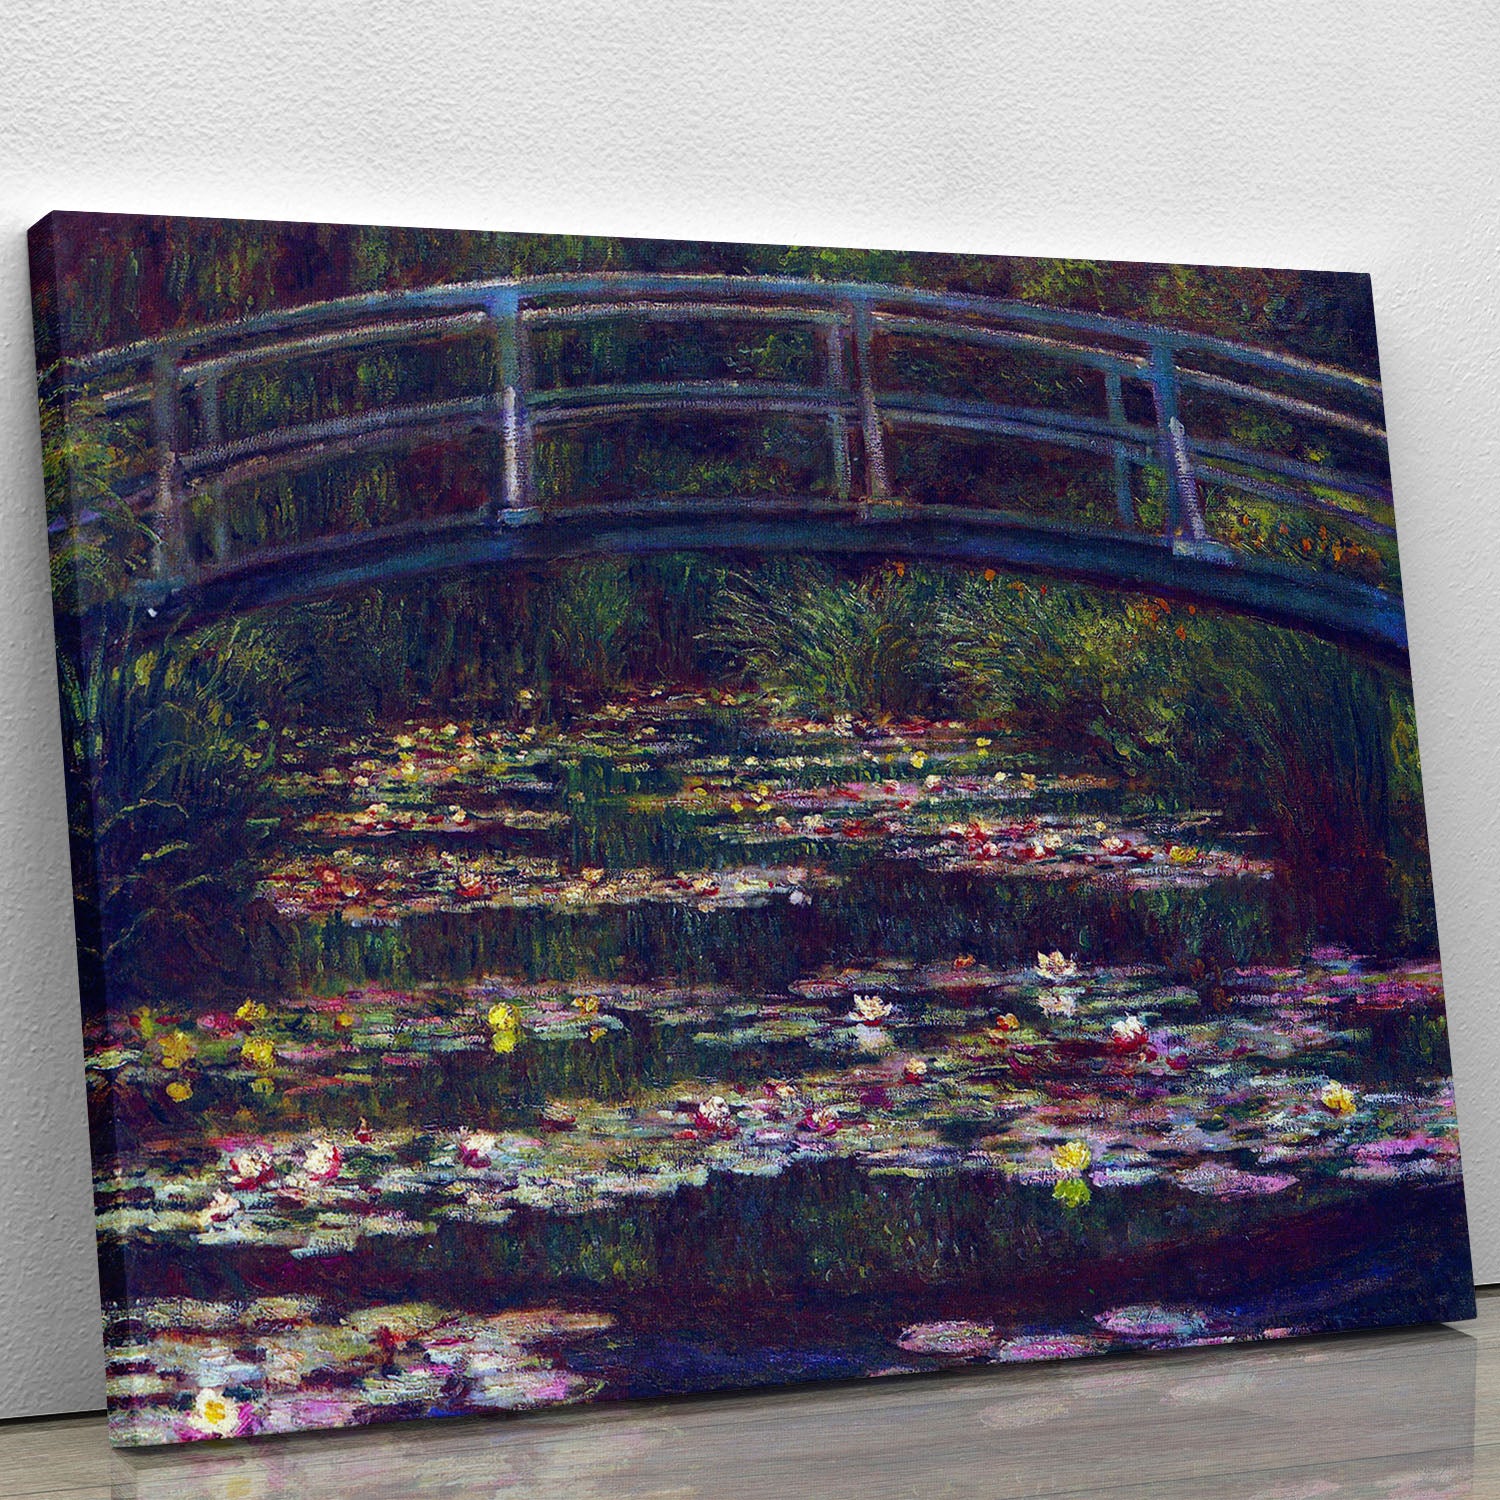 Water Lily Pond 5 by Monet Canvas Print or Poster - Canvas Art Rocks - 1